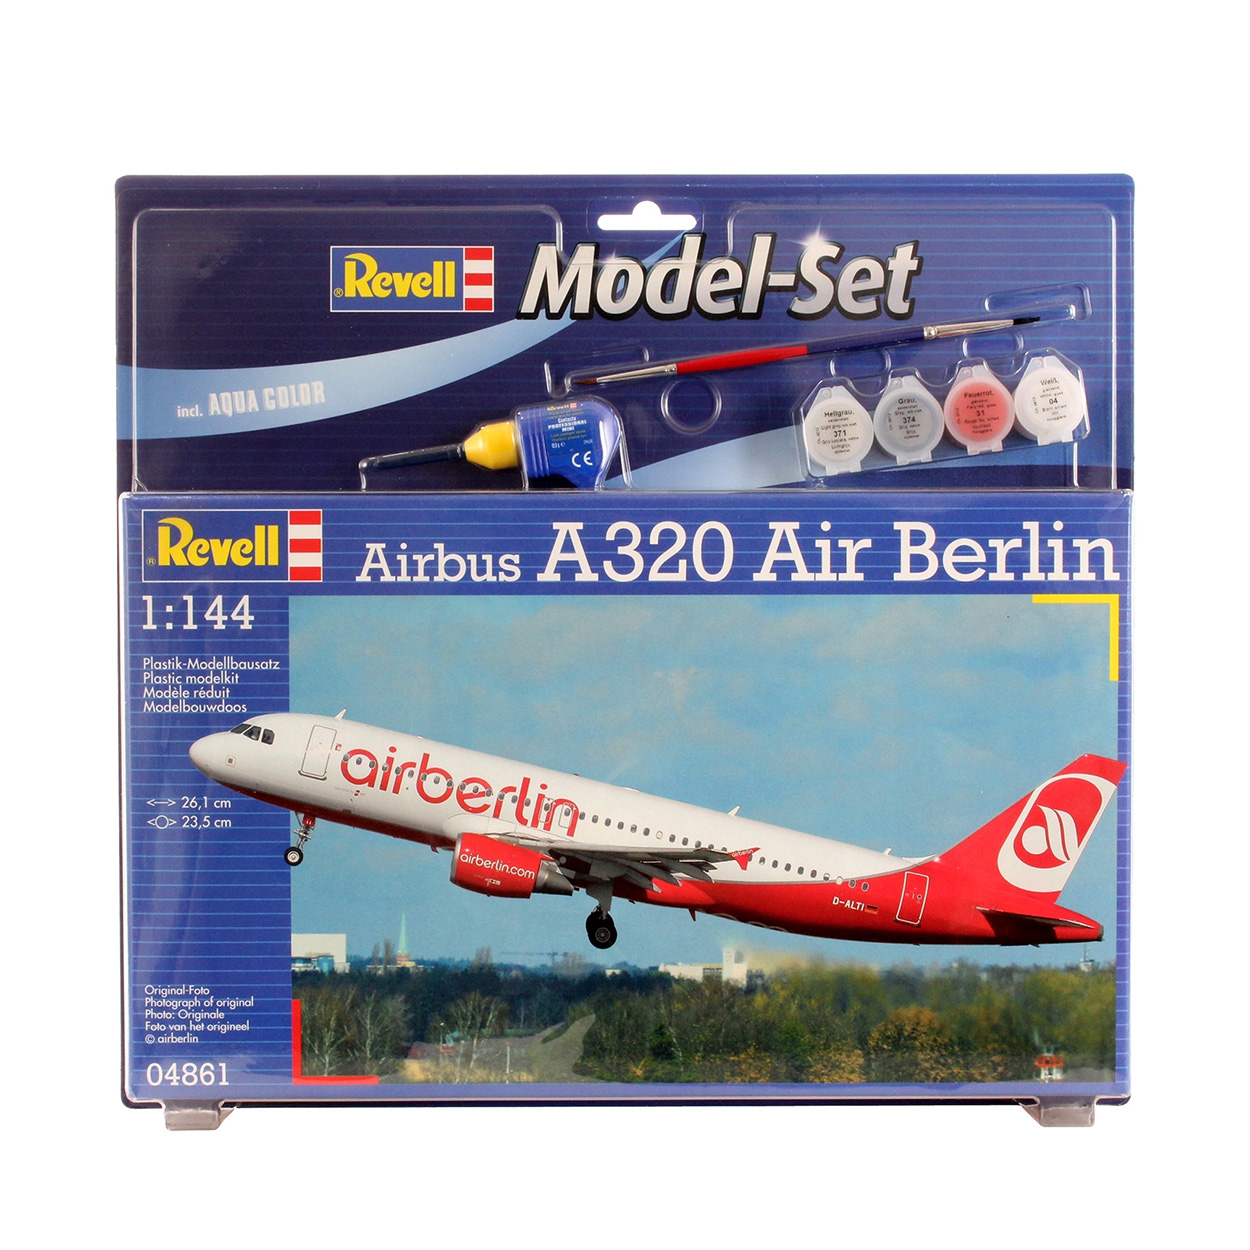 Revell Model Set Airbus A320 AirBerlin